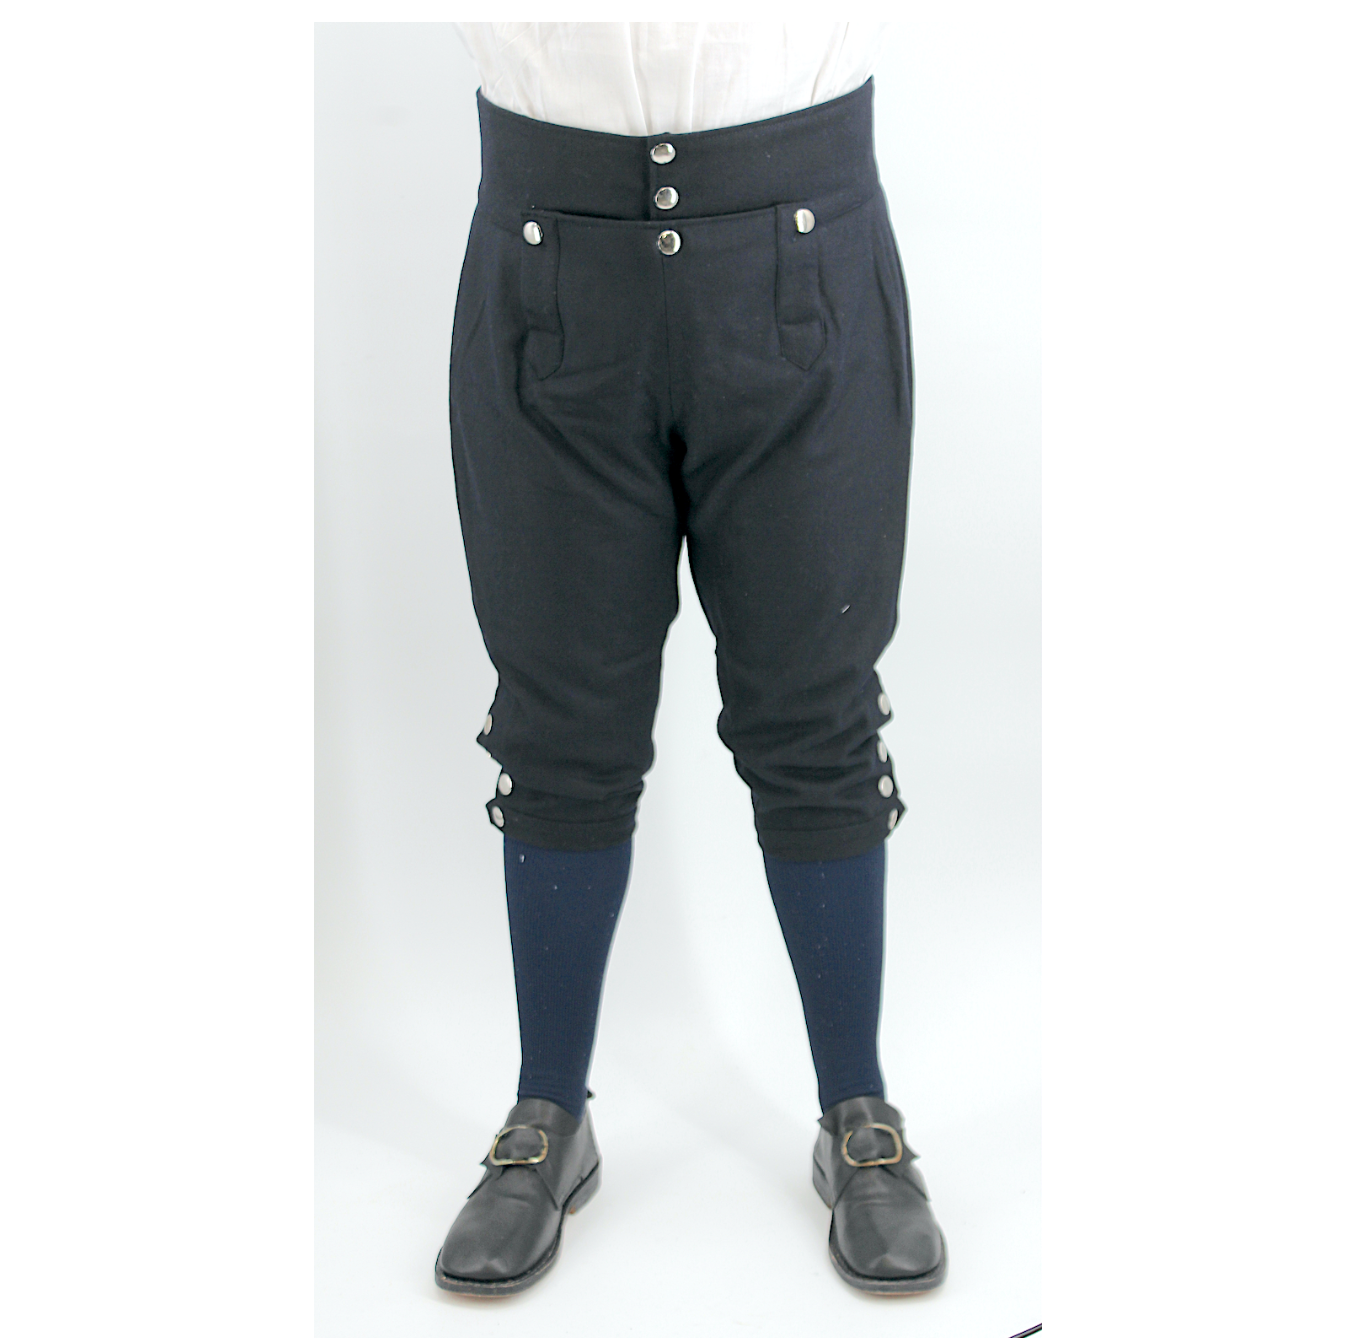 Colonial Breeches: Historic Style Bottoms